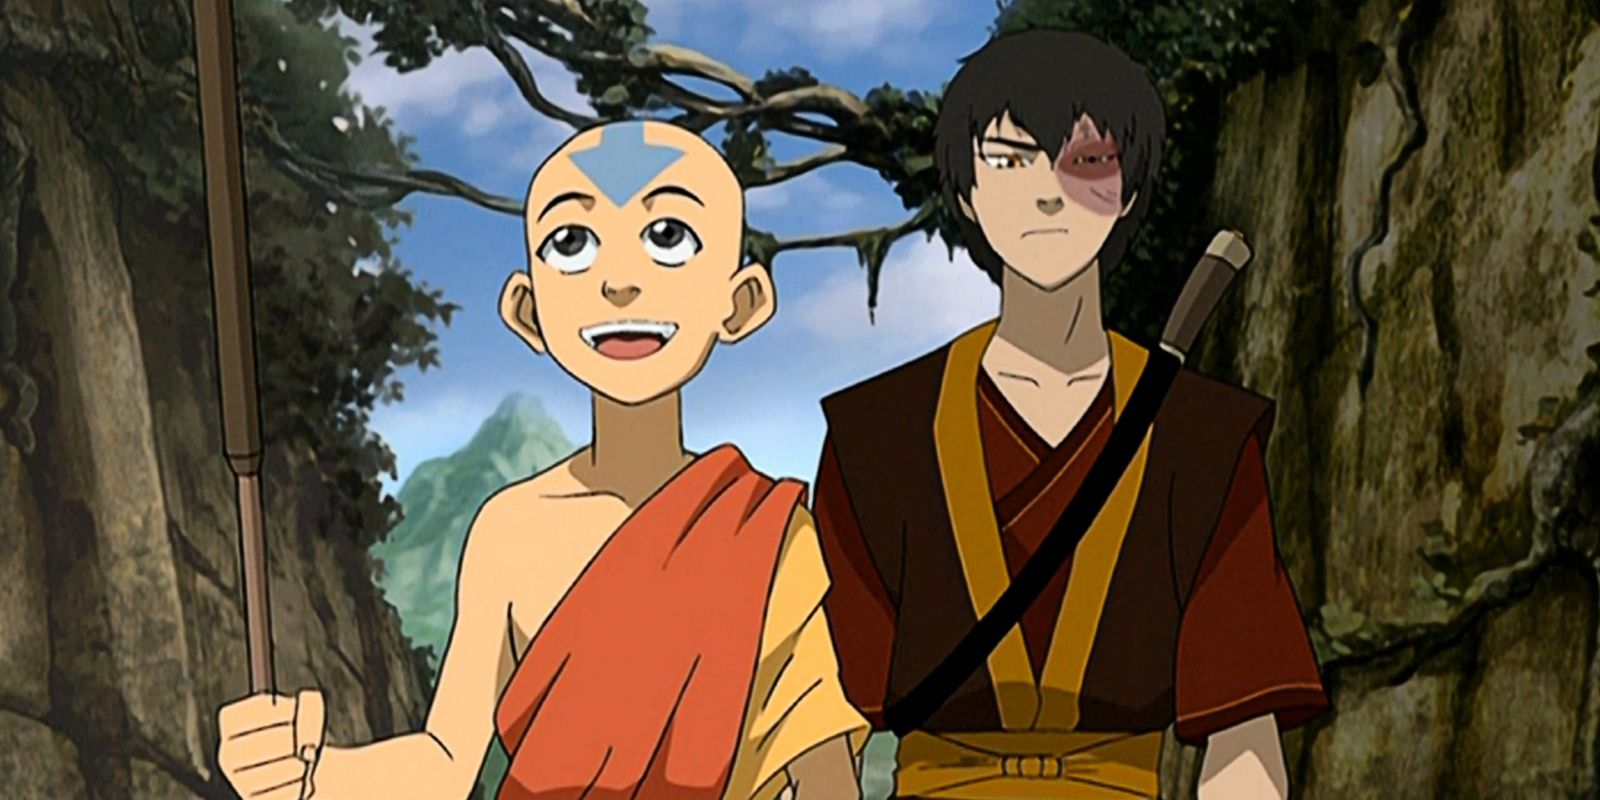 Aang and Zuko in awe from Avatar: The Last Airbender